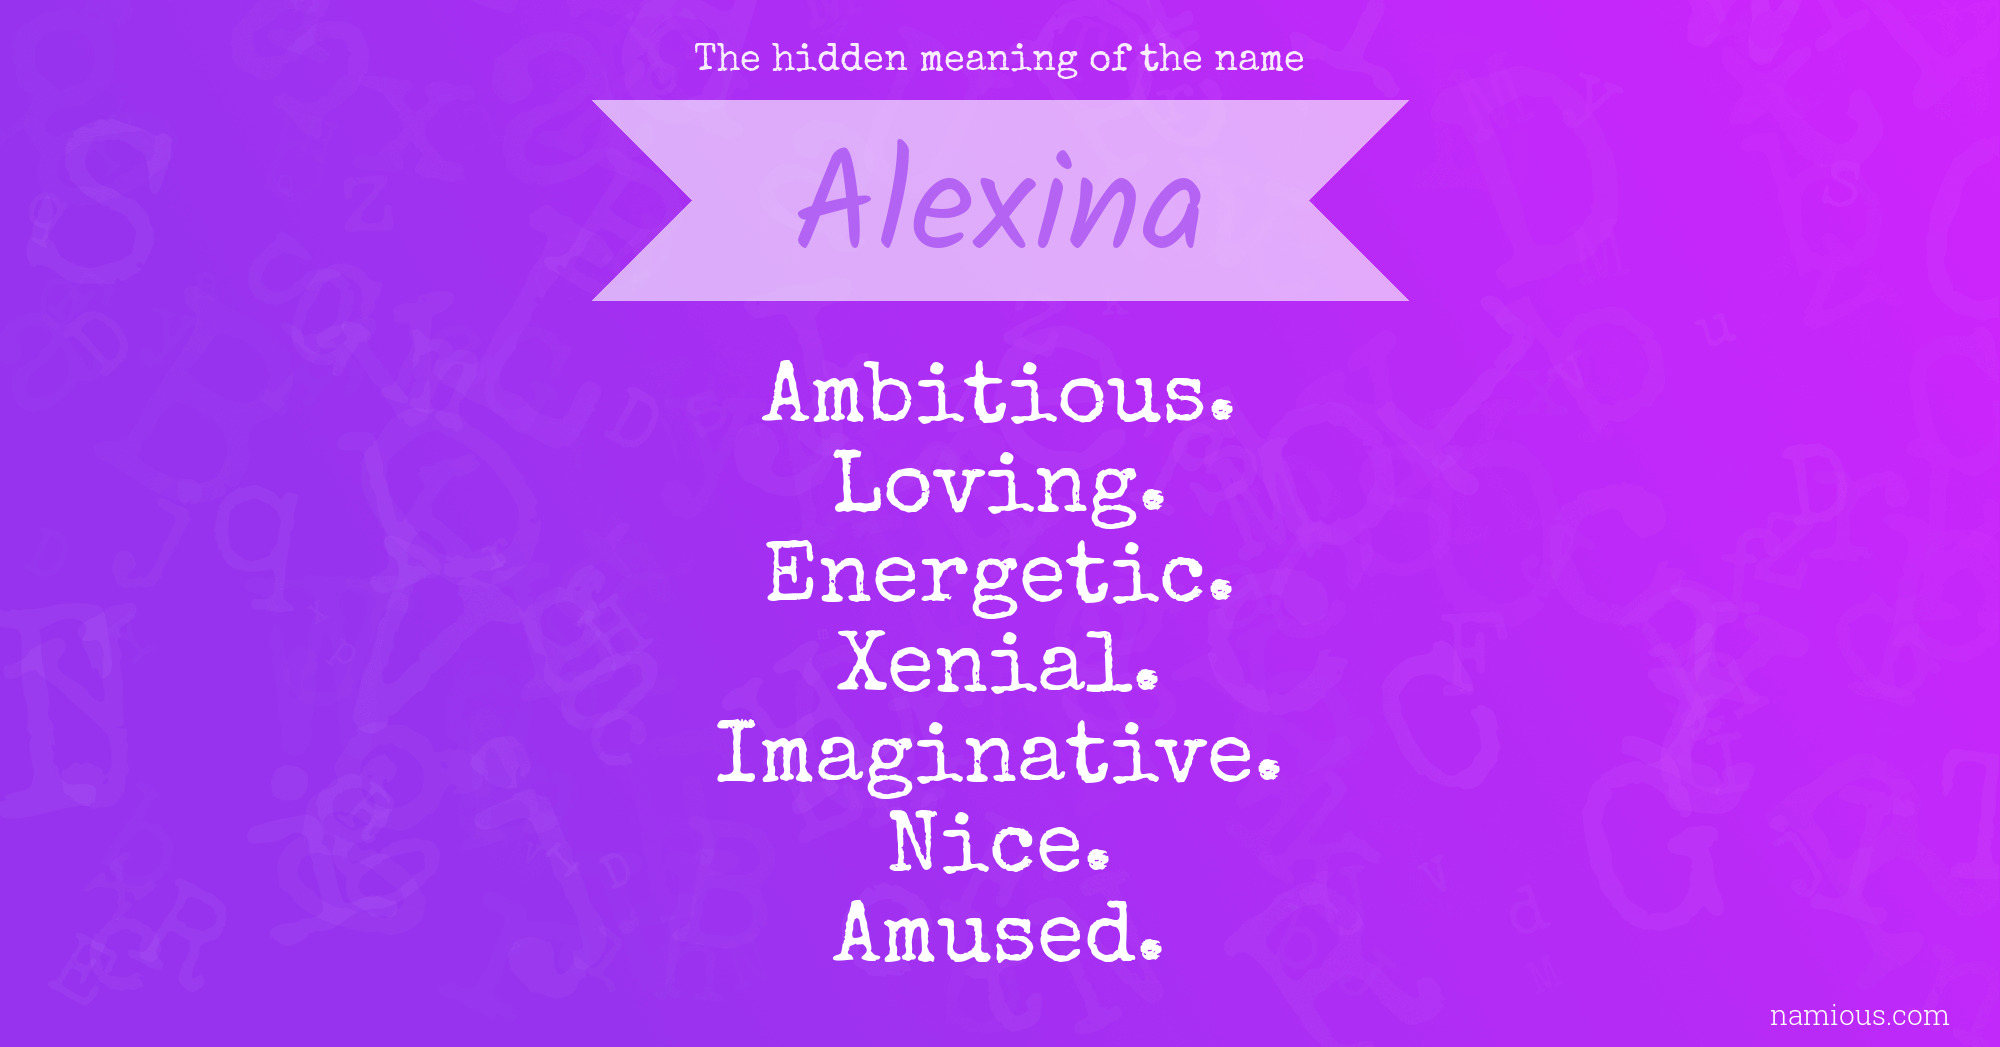 The hidden meaning of the name Alexina